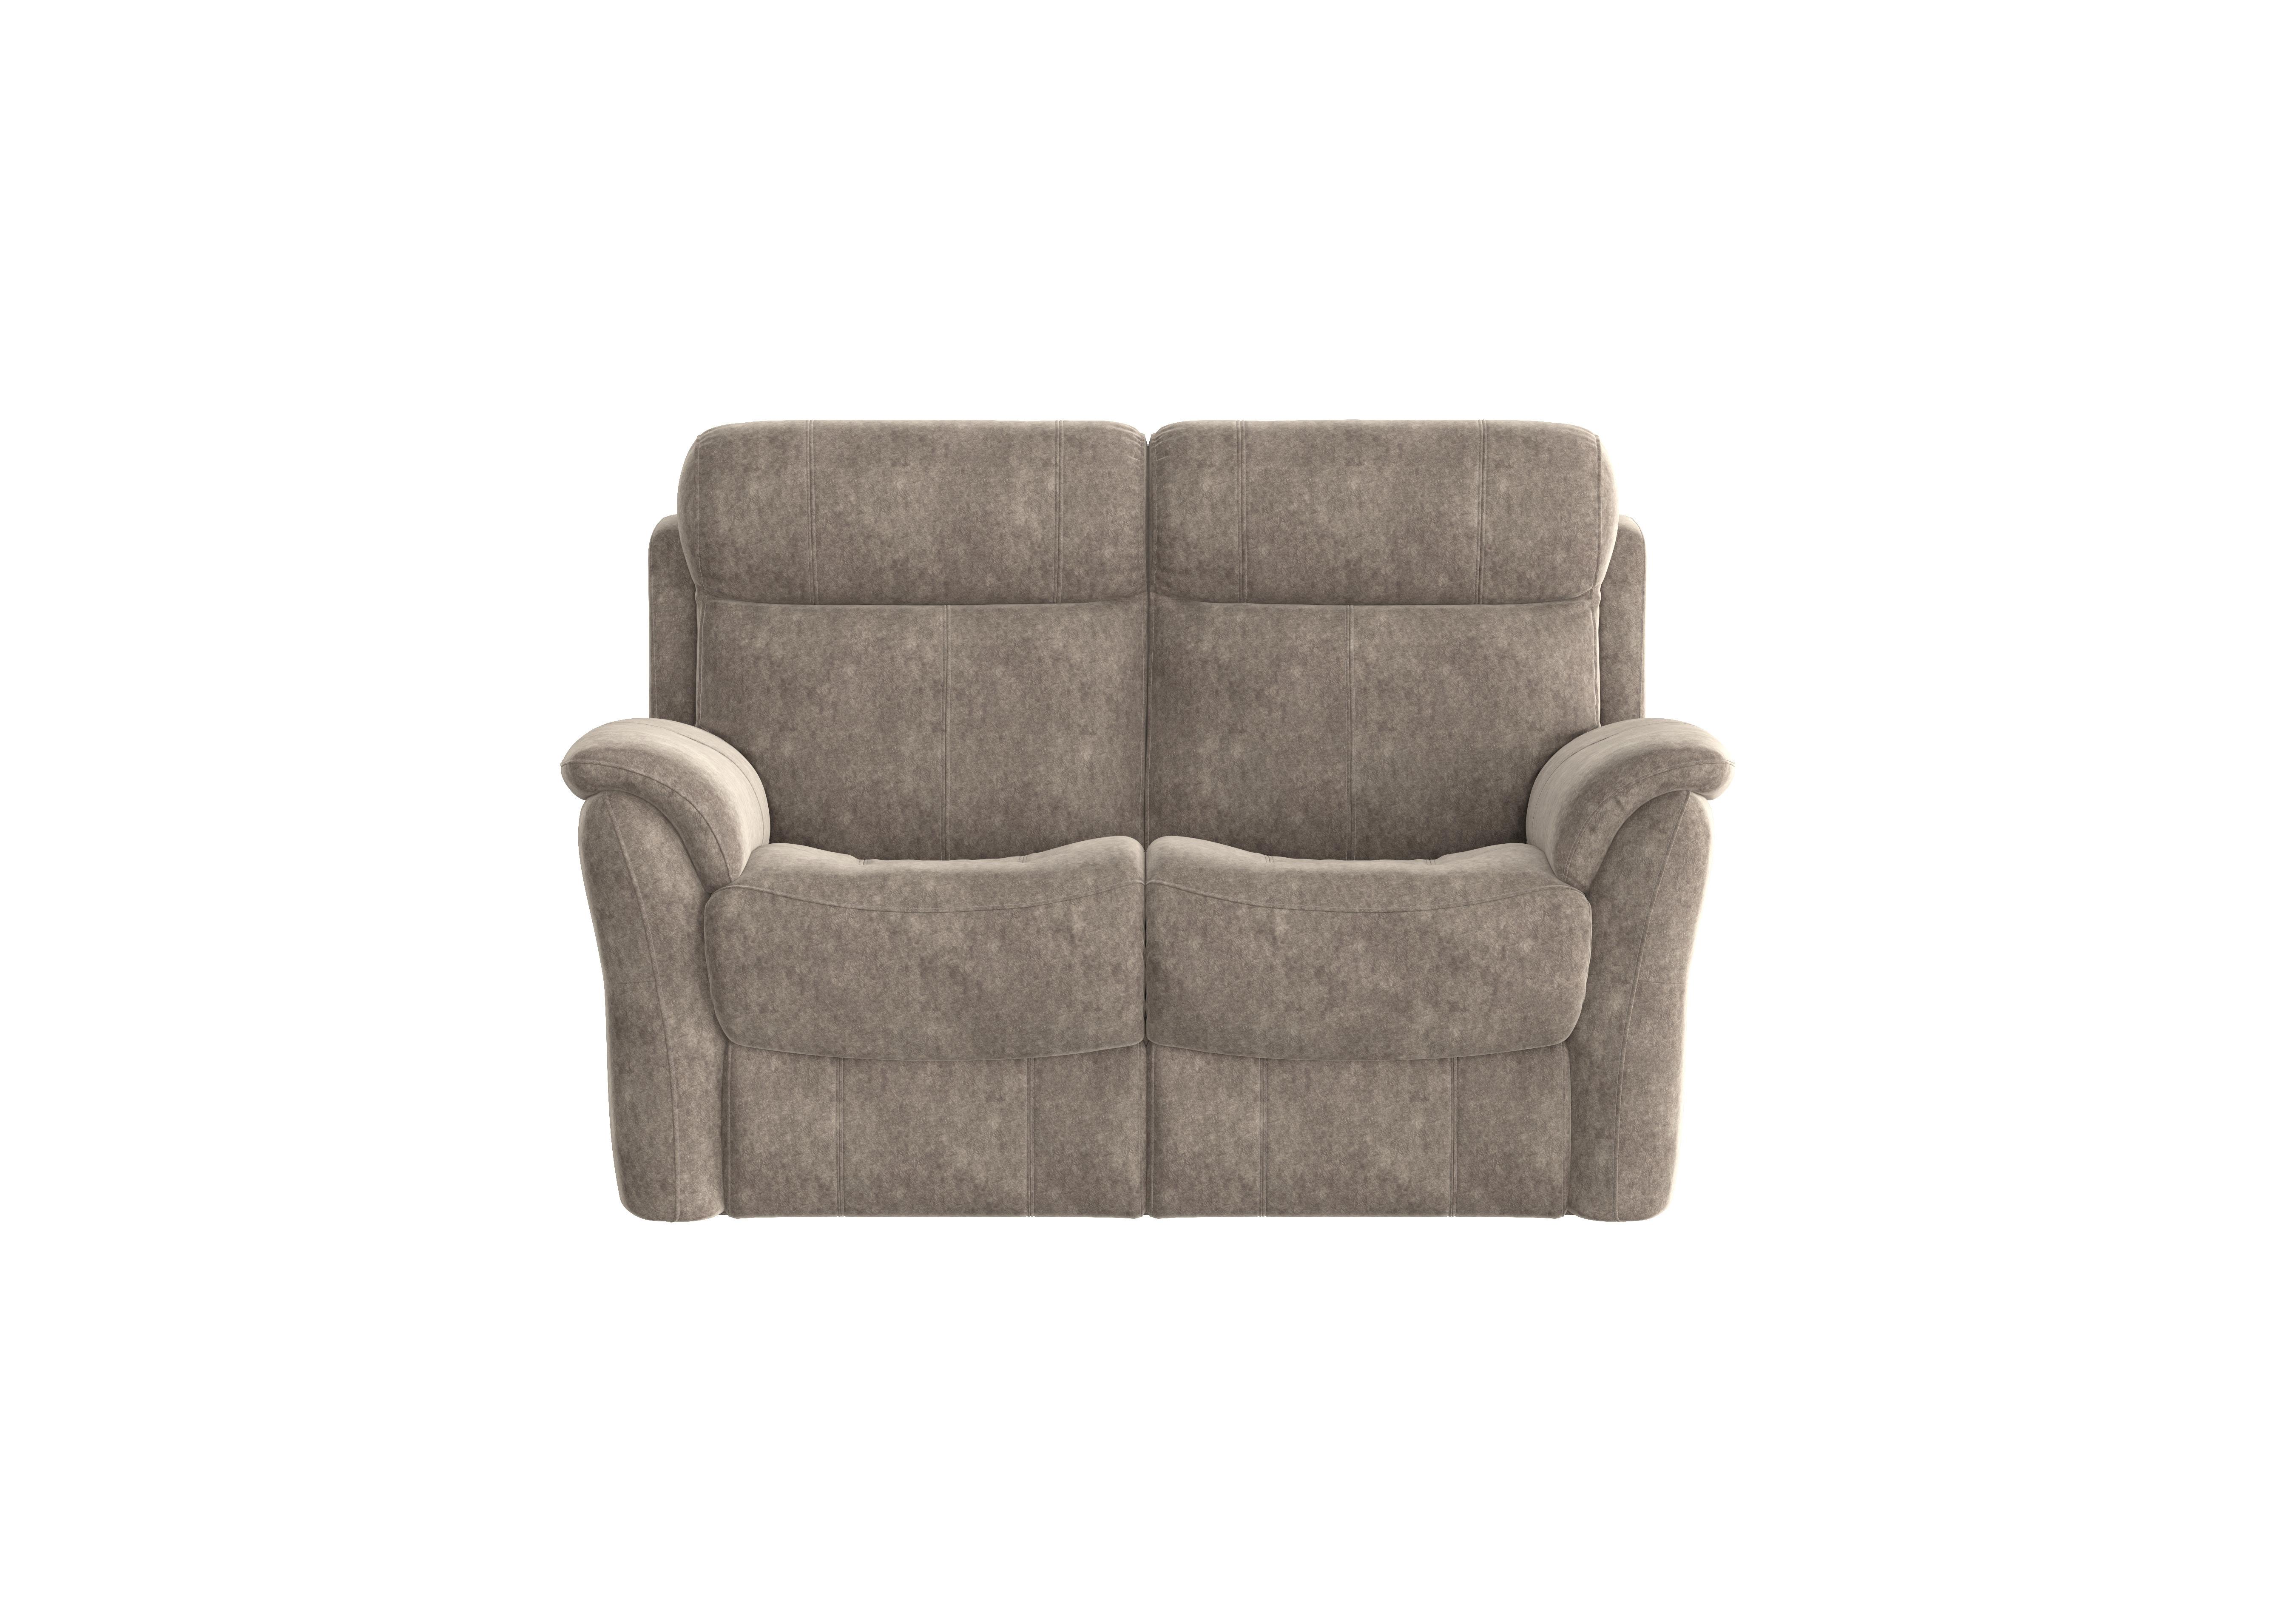 Relax Station Revive 2 Seater Fabric Sofa in Bfa-Bnn-R29 Fv1 Mink on Furniture Village